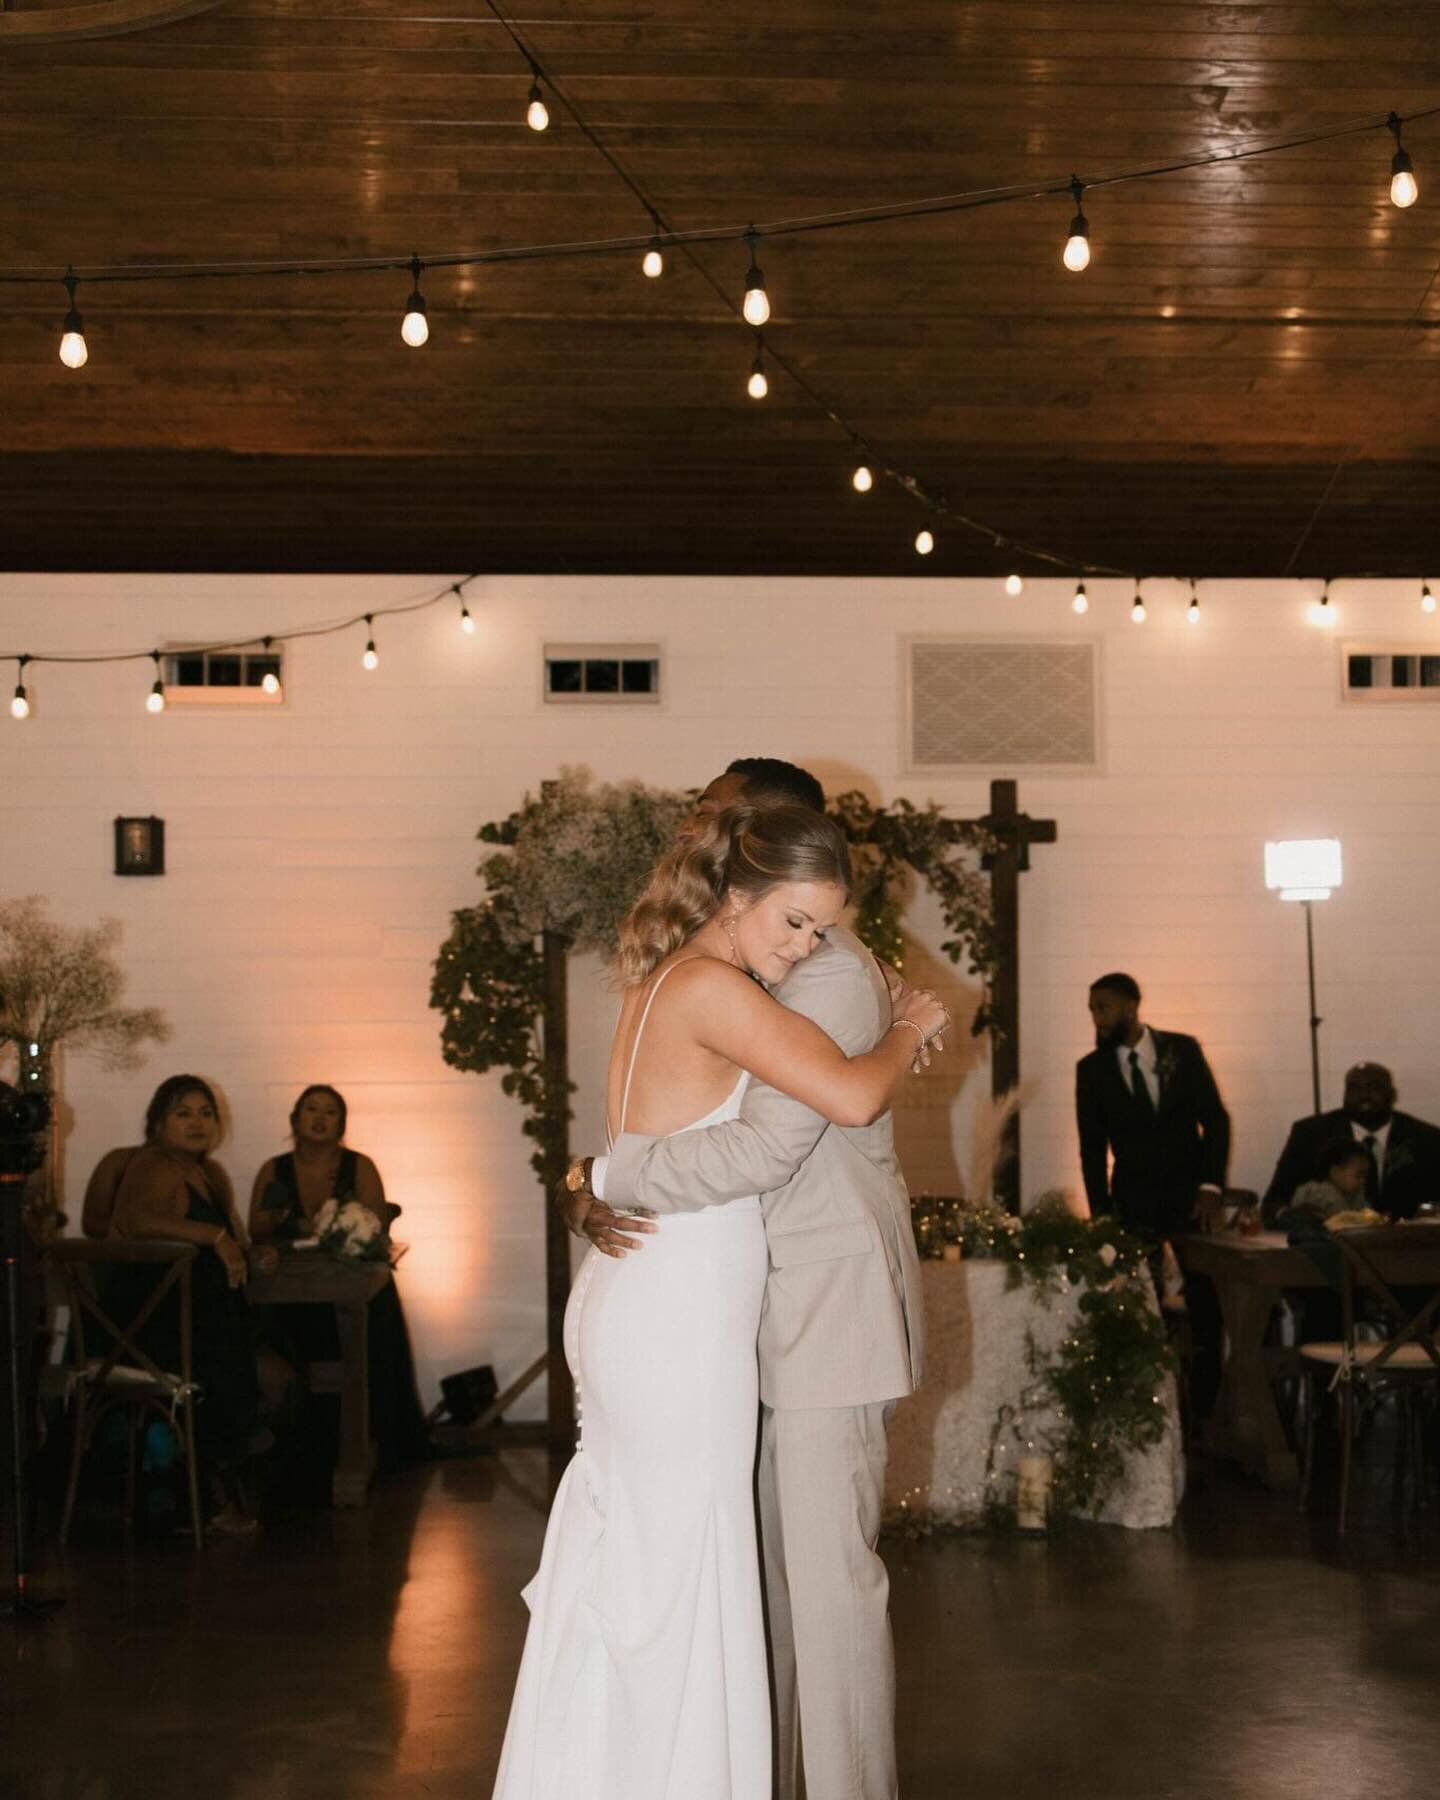 There's nothing like the first dance photos - especially ones like this! 

Carly &amp; Lance chose cafe lighting to accent their decor details at The Venue at Denali Jean Ranch and it was a vibee!! 

📸: @kyliemeyerphotography 
Event Planner: @jamiel